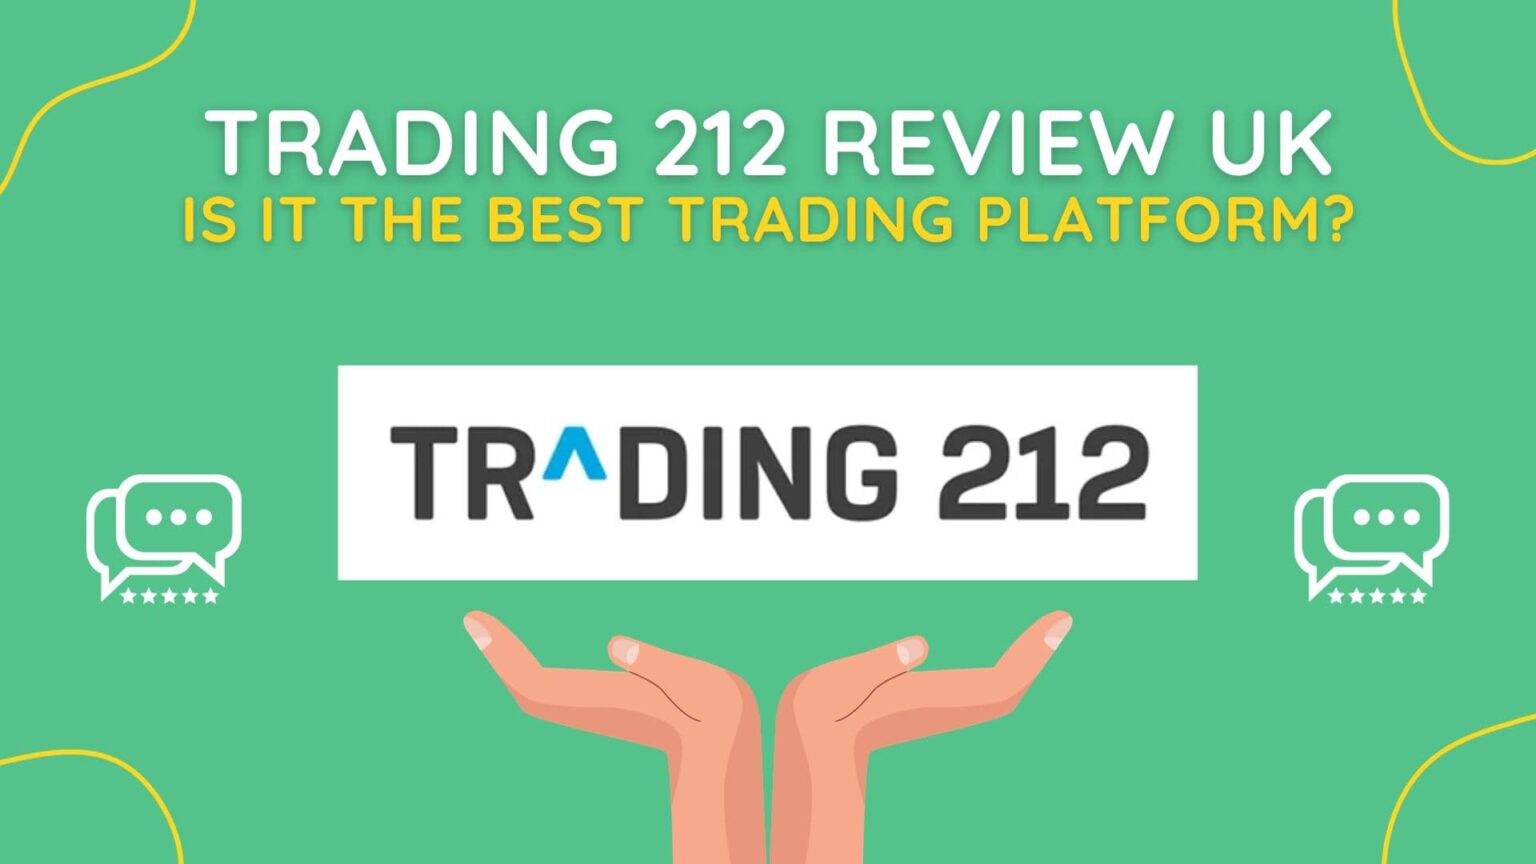 Trading 212 Review UK Featured Graphic 1536x864 